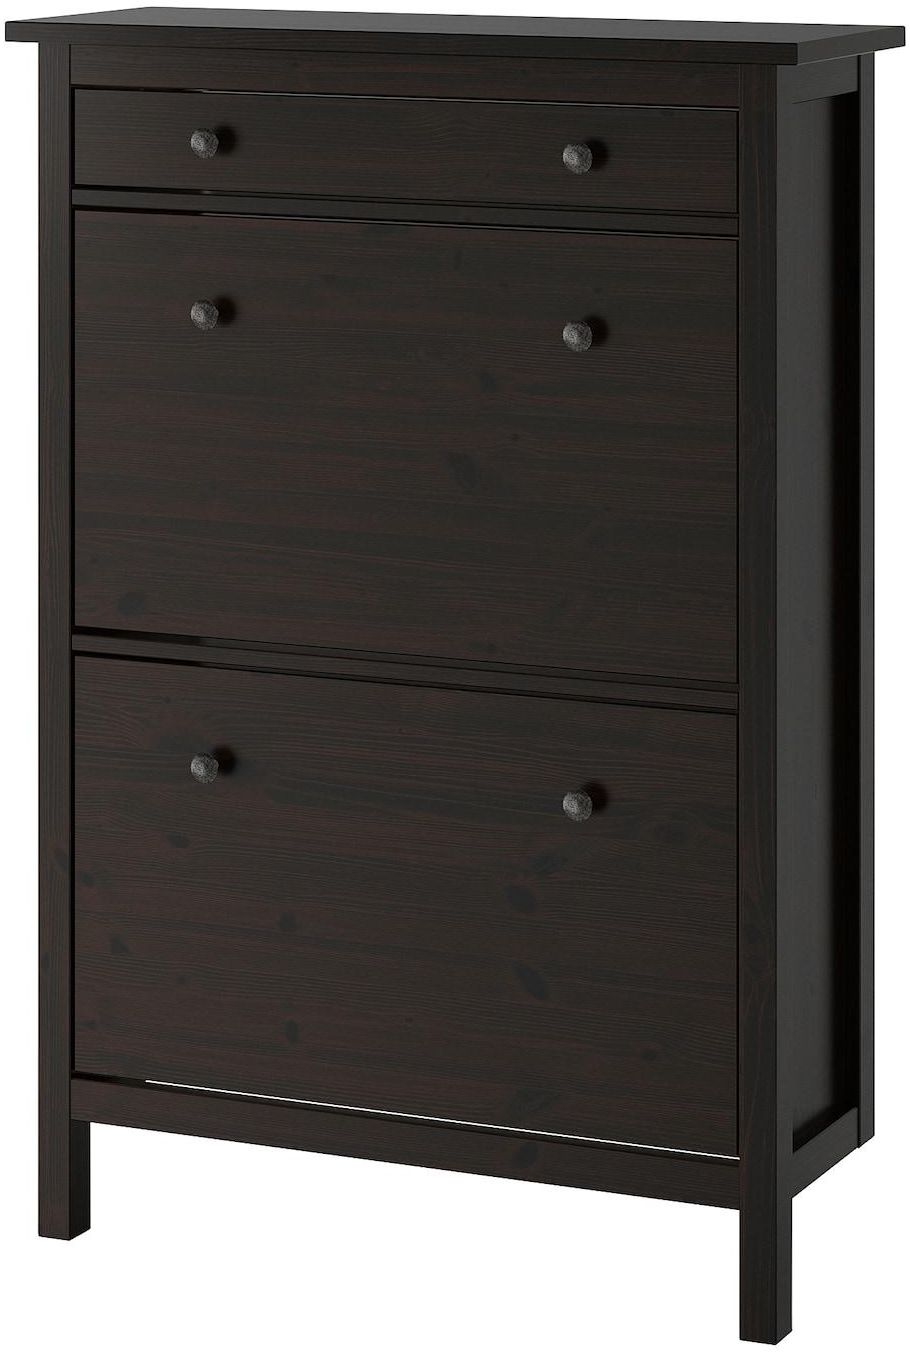 HEMNES Shoe cabinet with 2 compartments - black-brown 89x30x127 cm